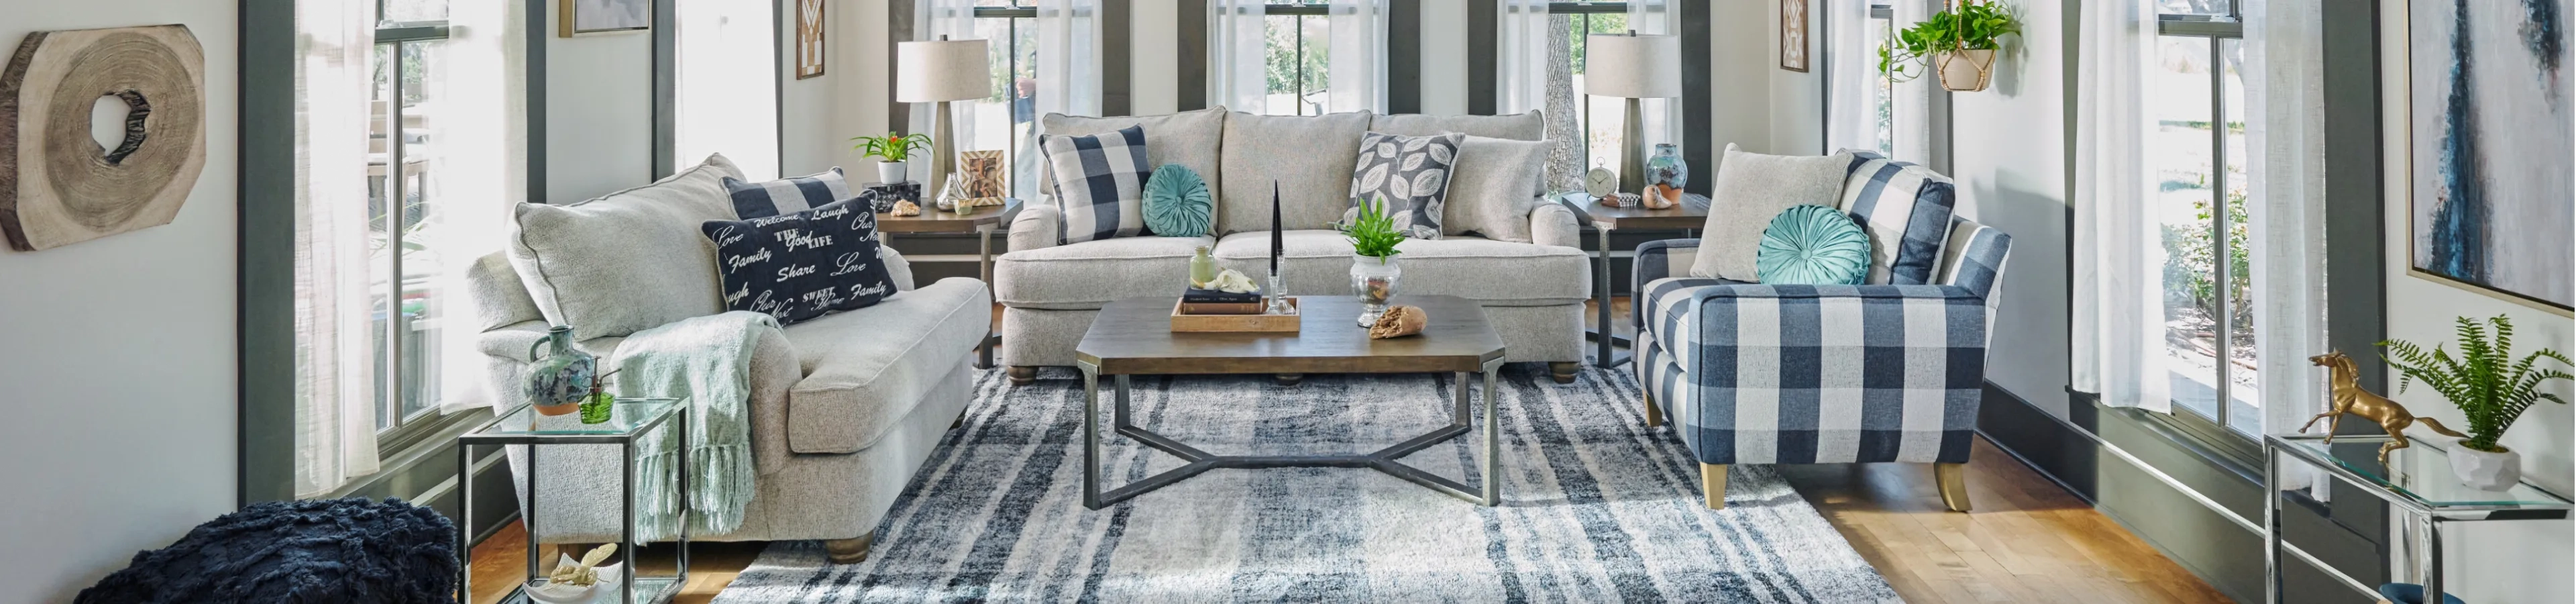 gray living room with blue accents